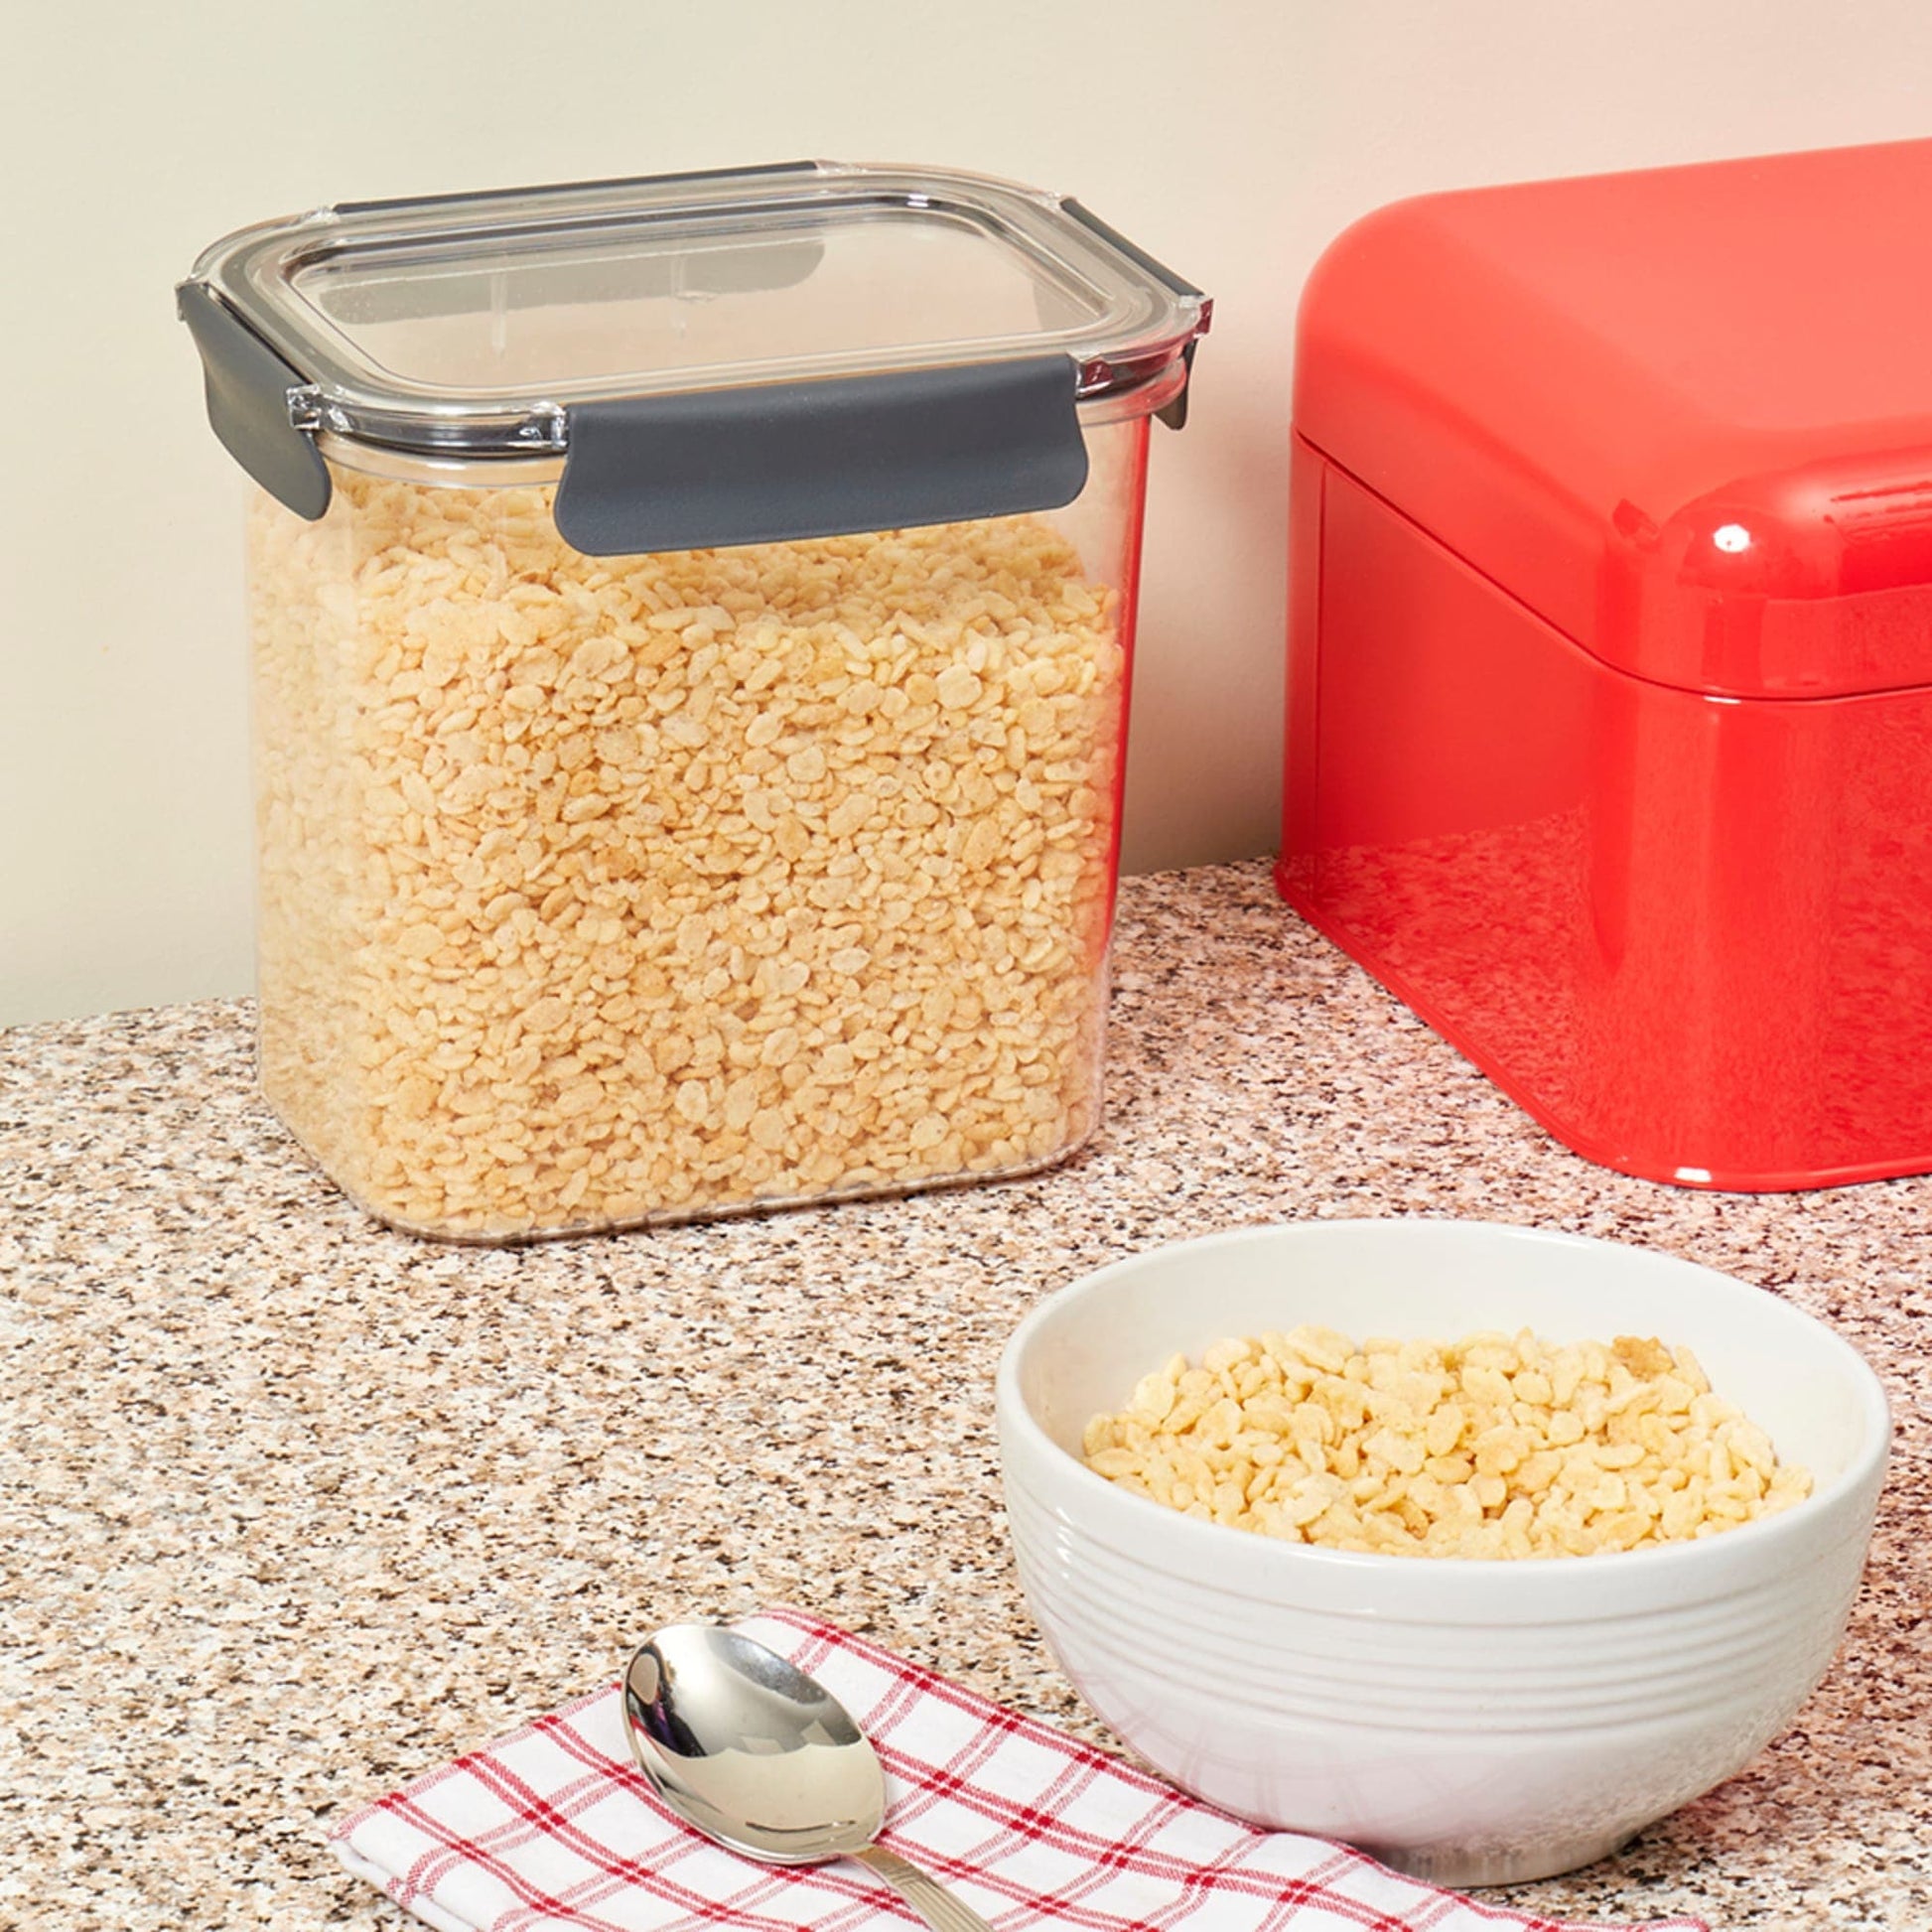 🏠 100 Large & Small Containers with Lids, Great for Food, Leftovers,  Storage - household items - by owner - housewares